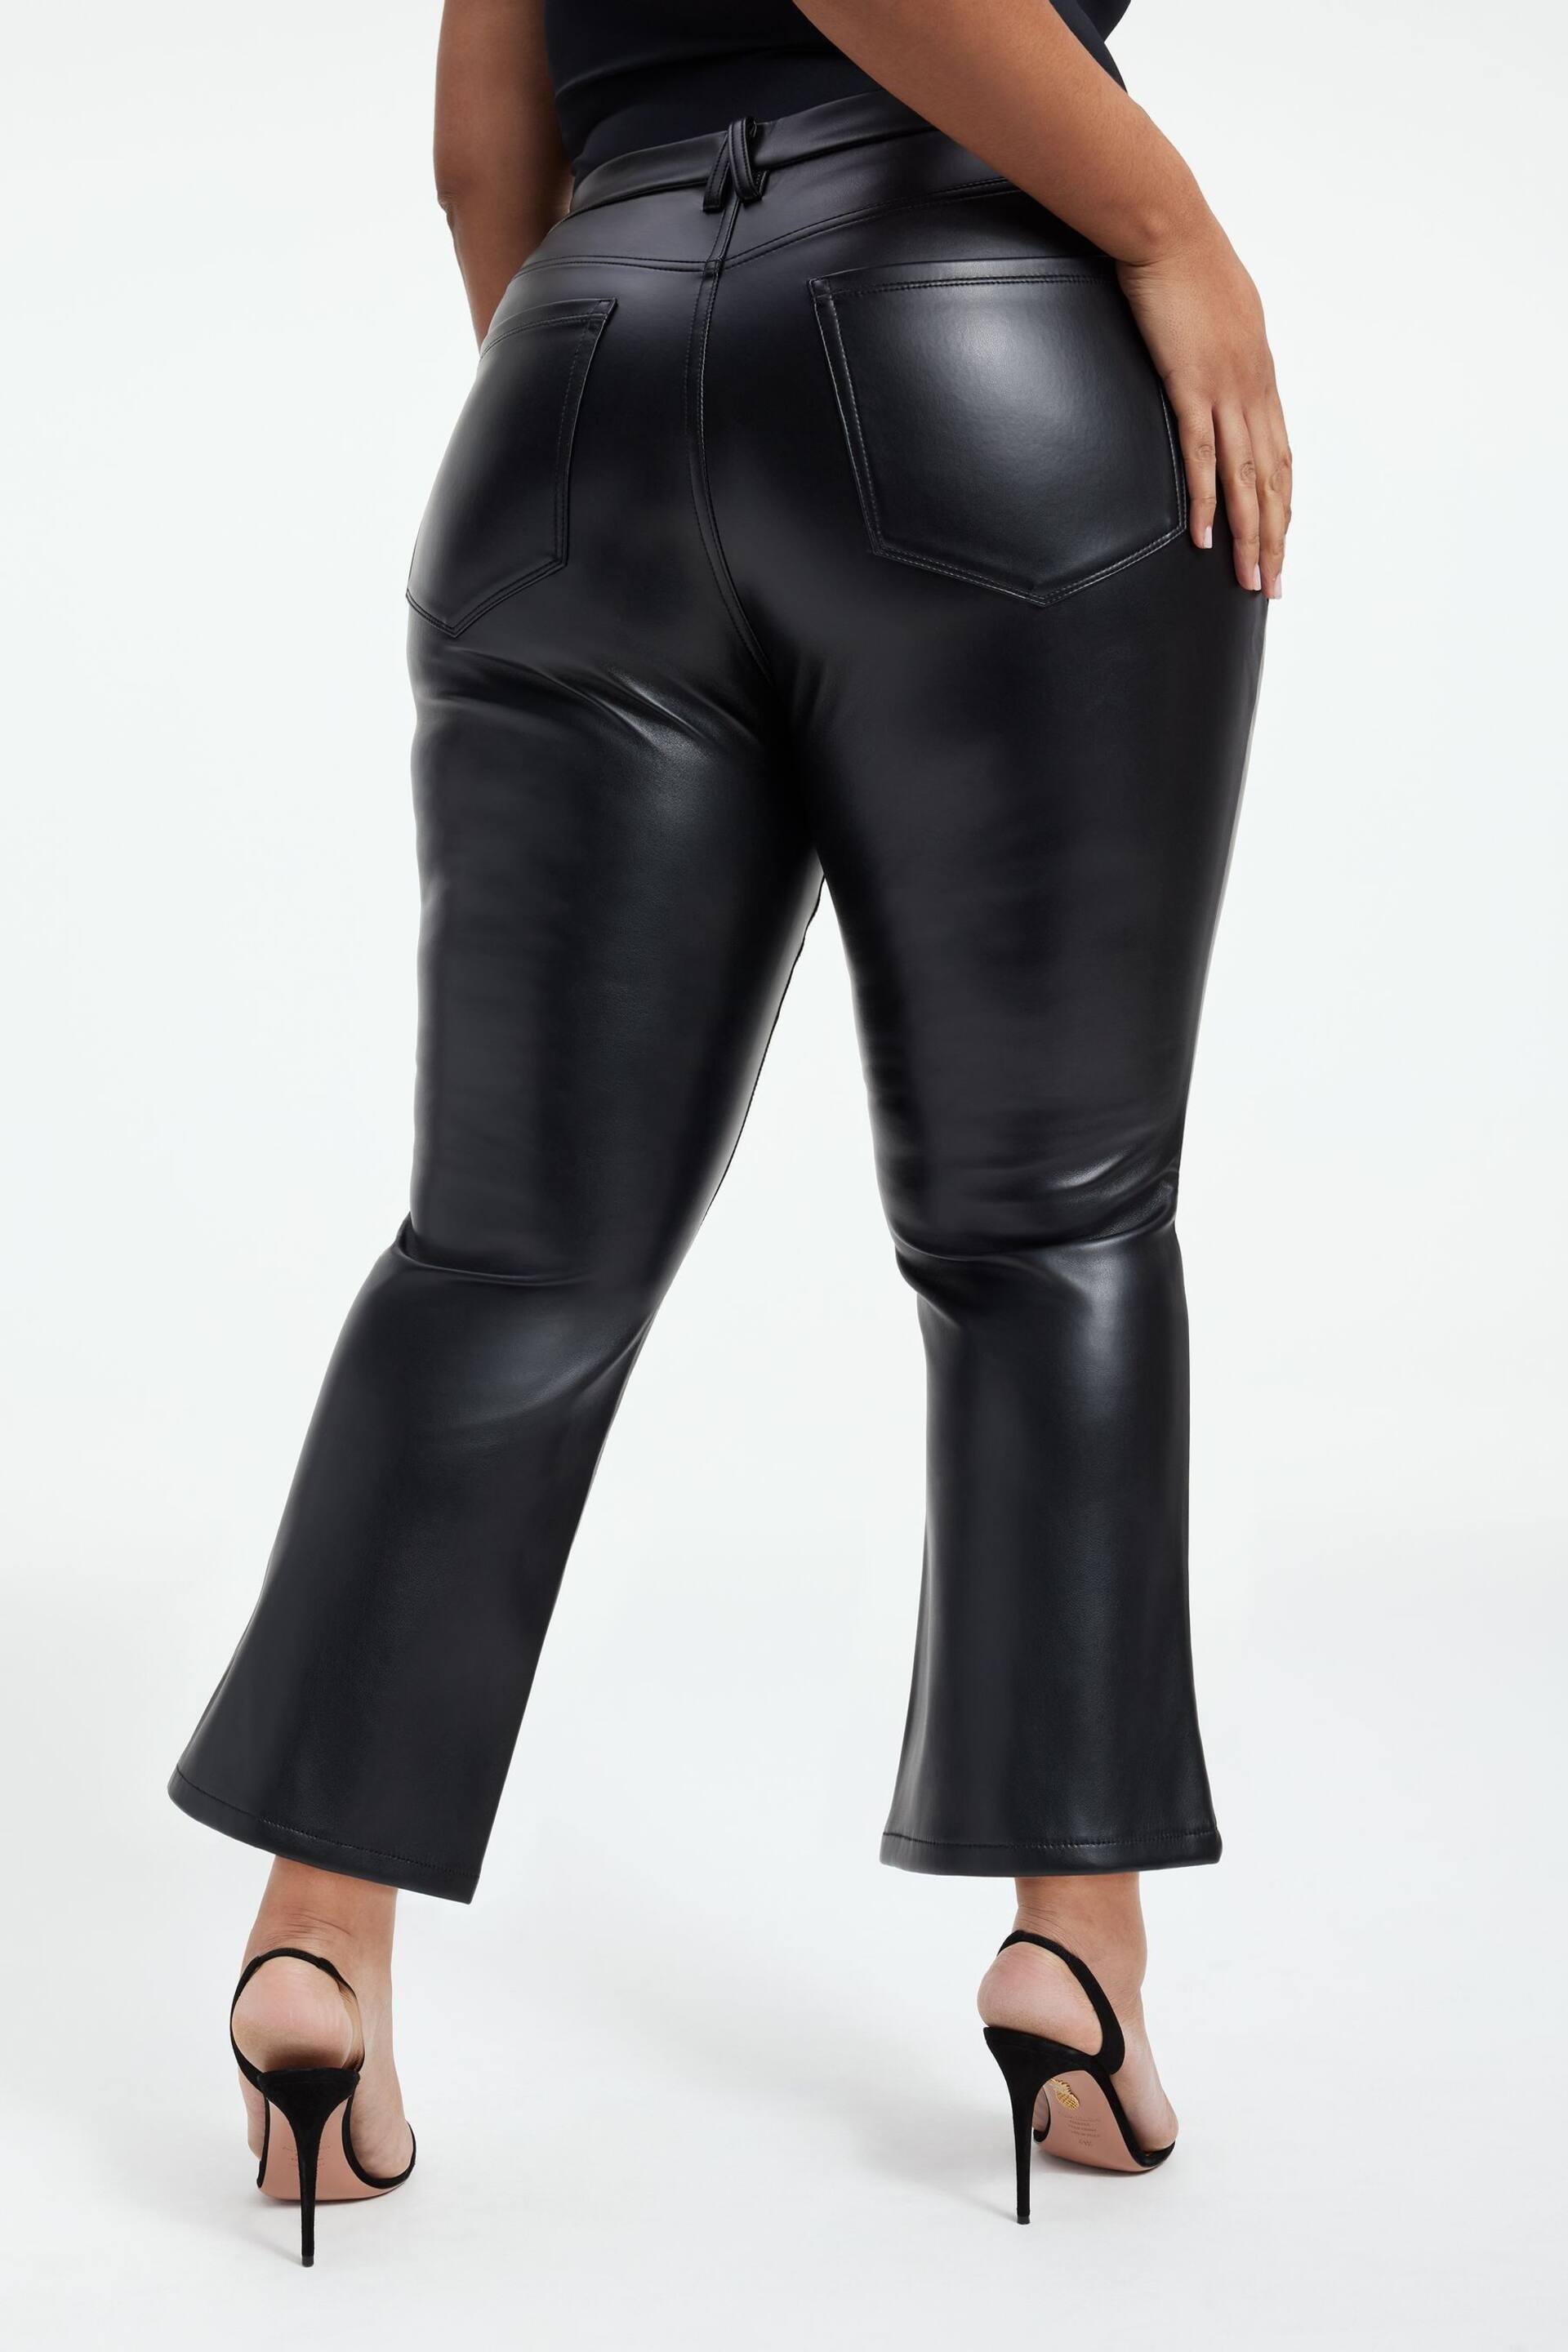 Good American Black Mini Good Legs Crop Boots Luxe Faux Fur Leather Trousers - Image 5 of 6